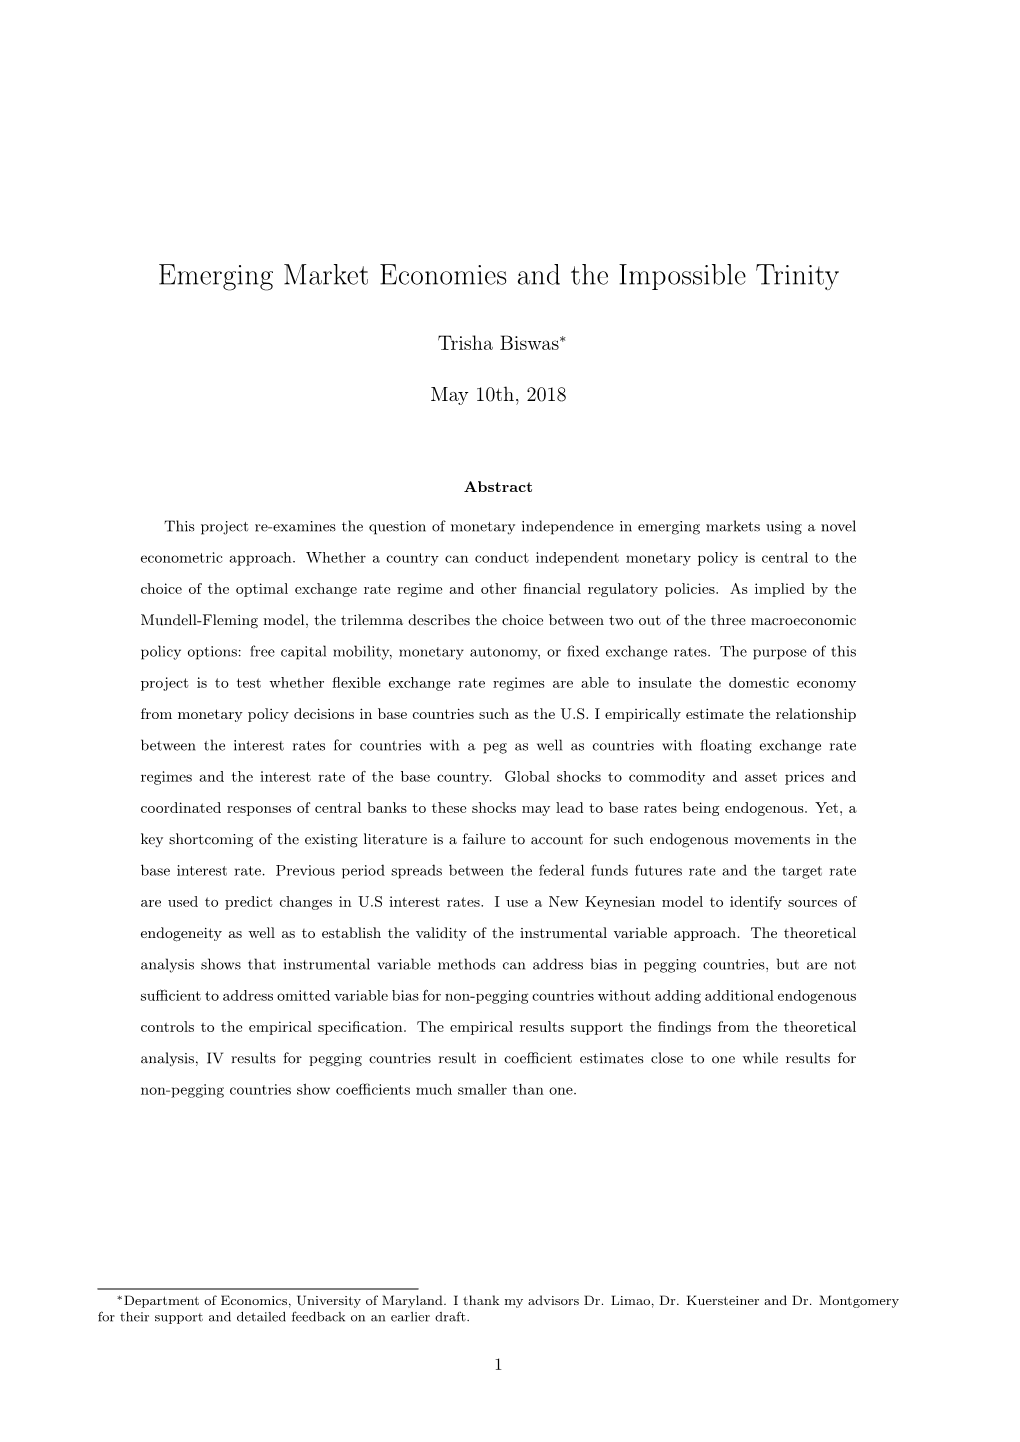 Emerging Market Economies and the Impossible Trinity